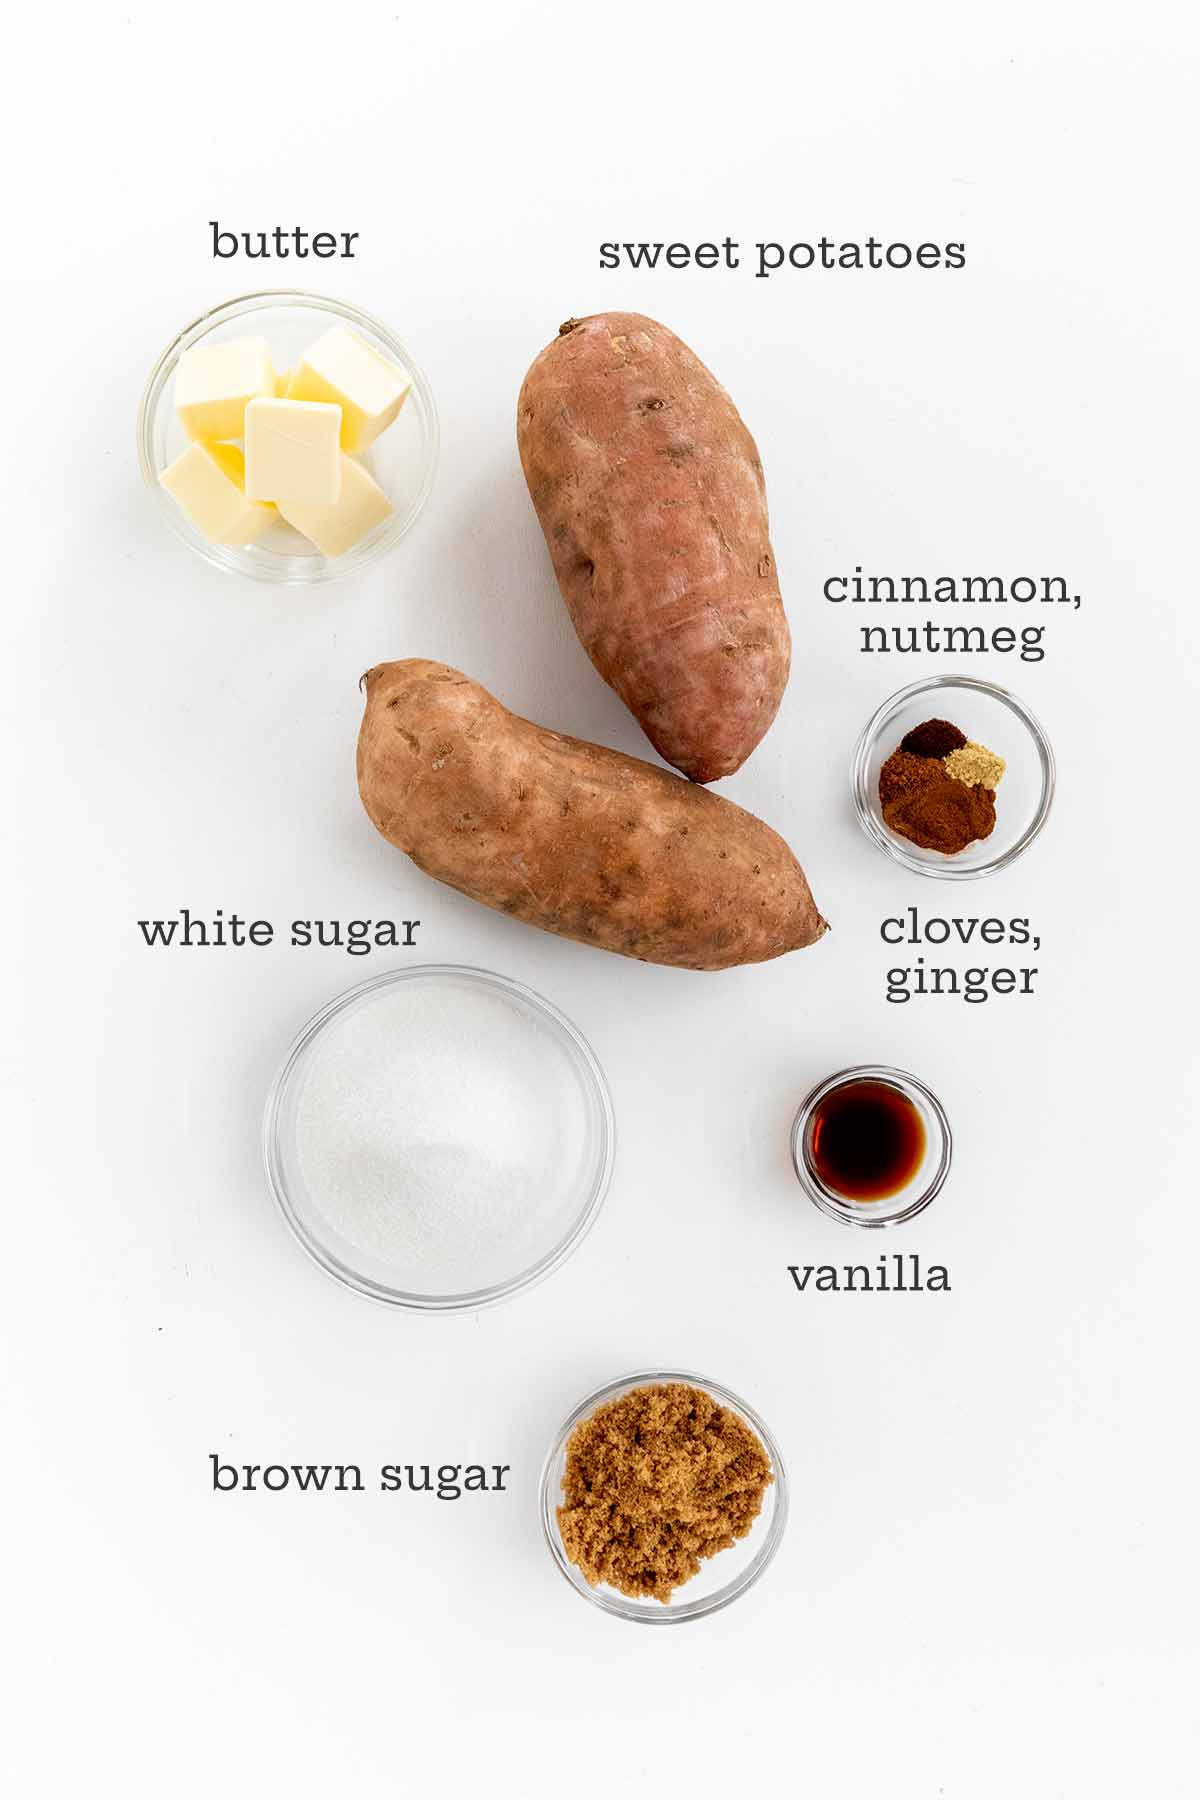 Ingredients for candied sweet potatoes--sweet potatoes, butter, spices, white and brown sugar, and vanilla.